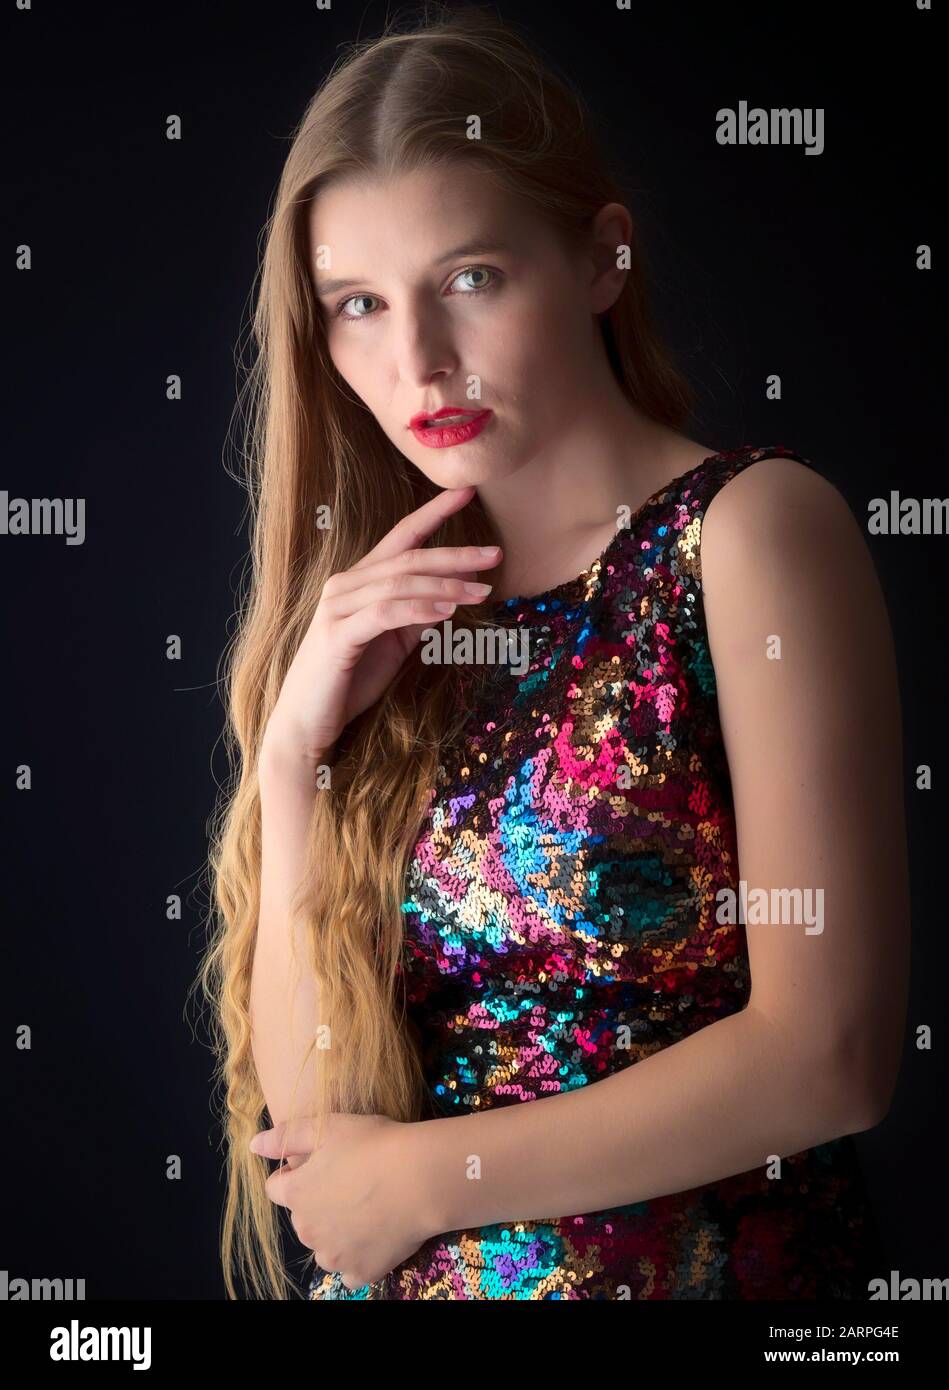 Young woman posing in stylish outfit in a studio setting Stock Photo